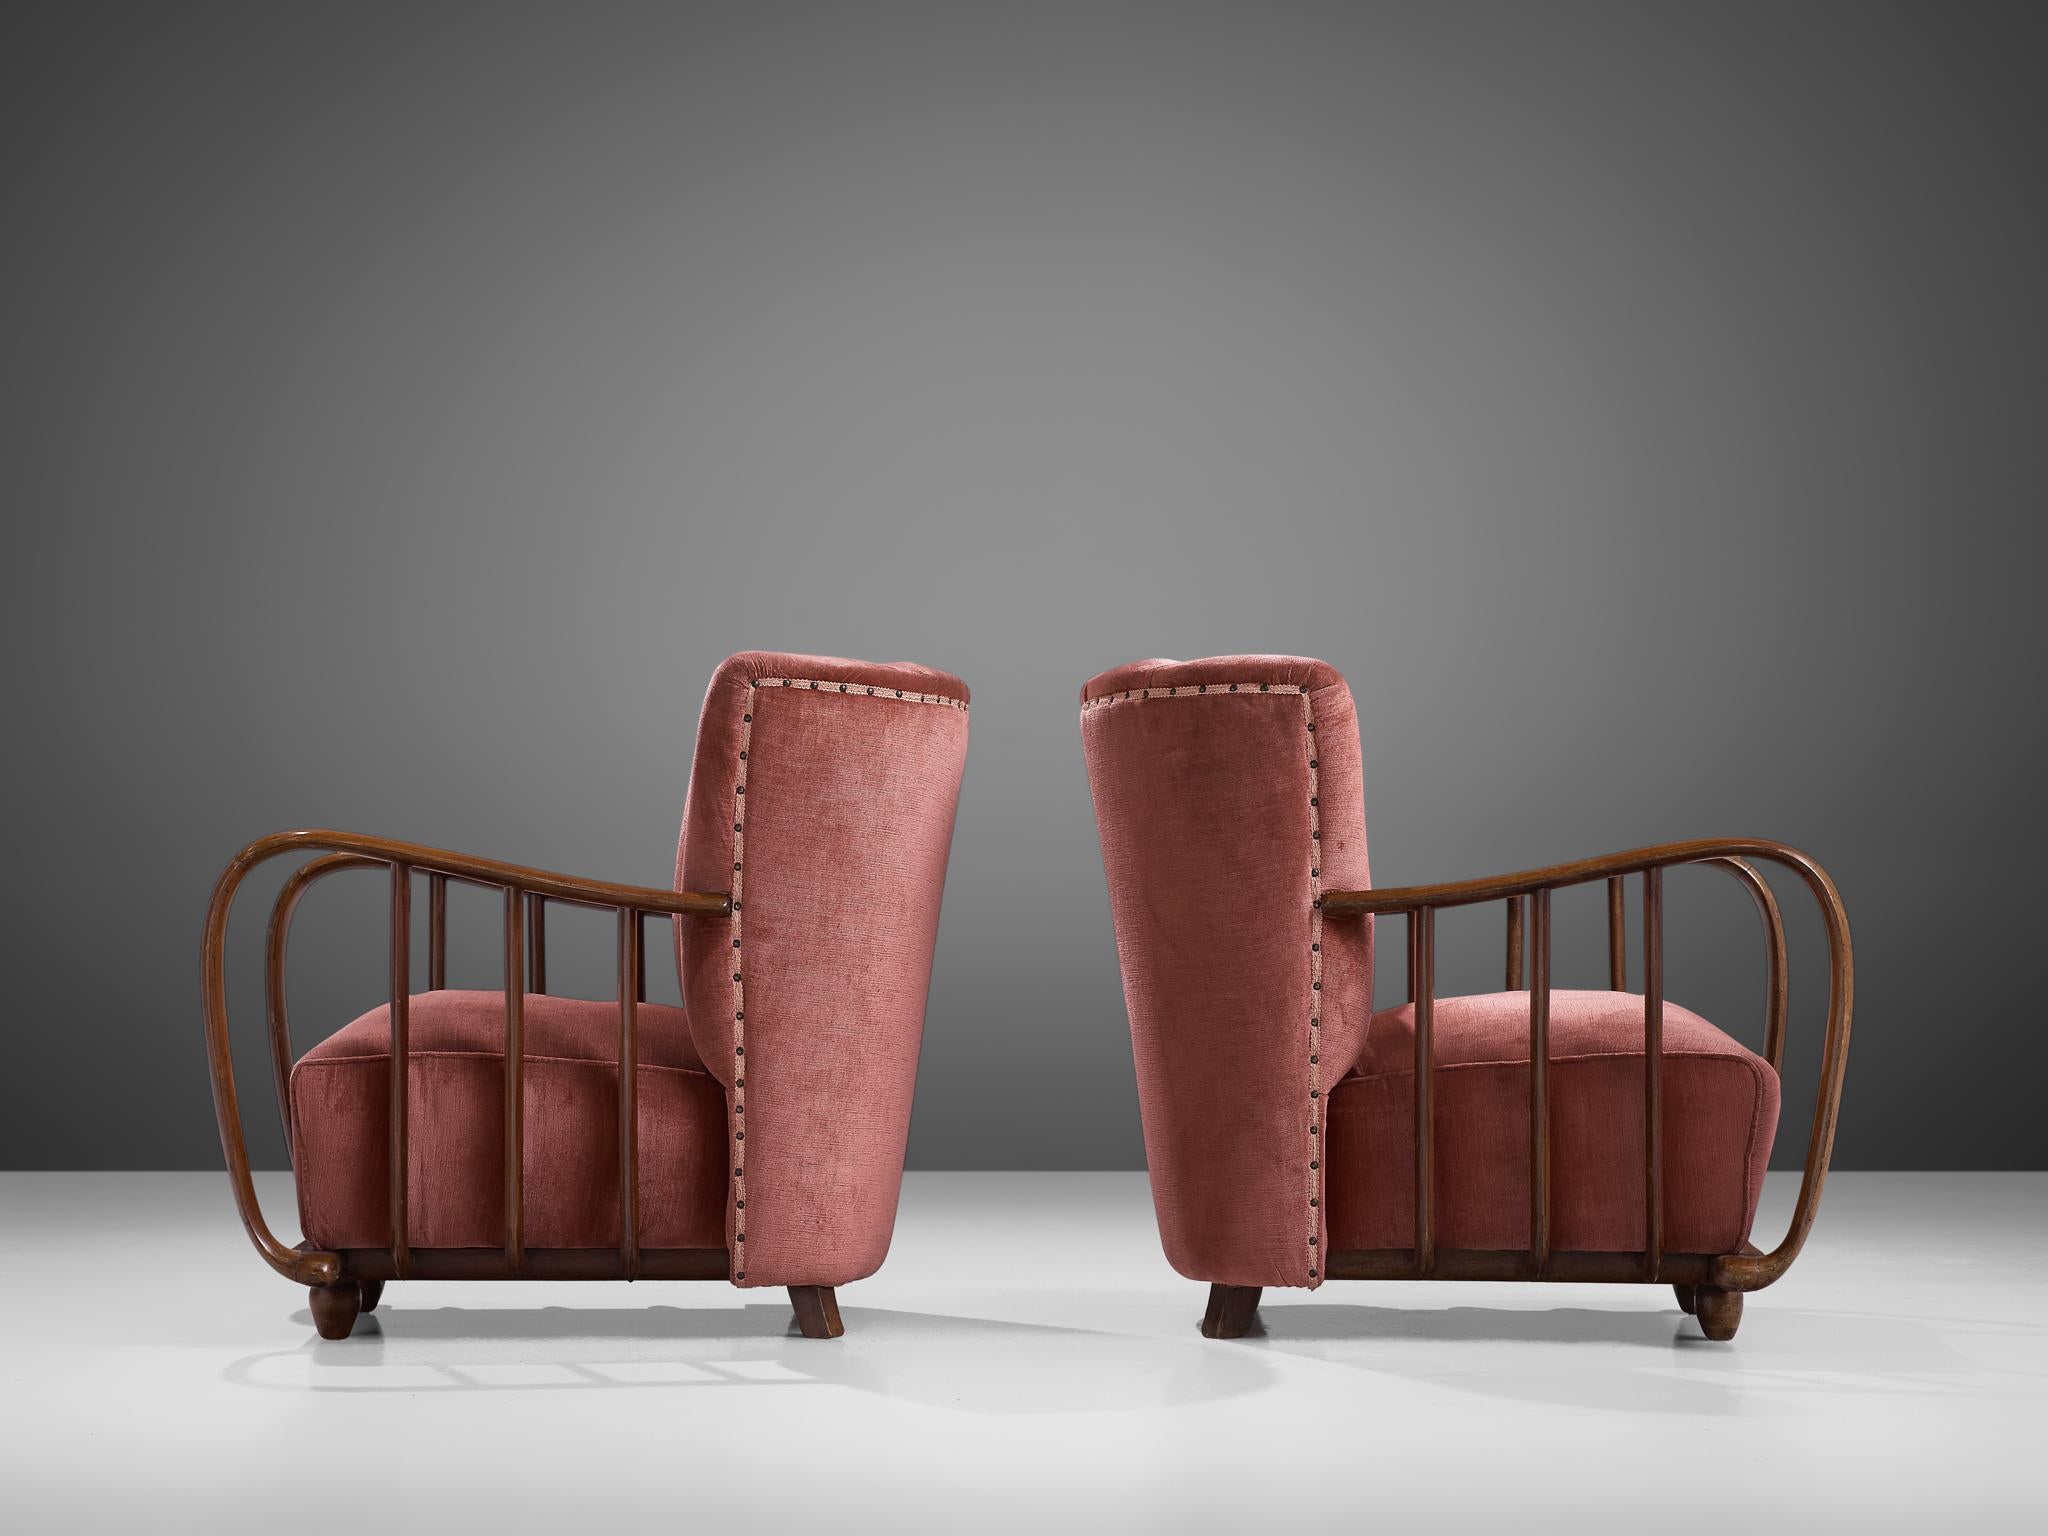 Mid-20th Century Pair of Italian Art Deco Armchairs with Coral Upholstery, 1940s